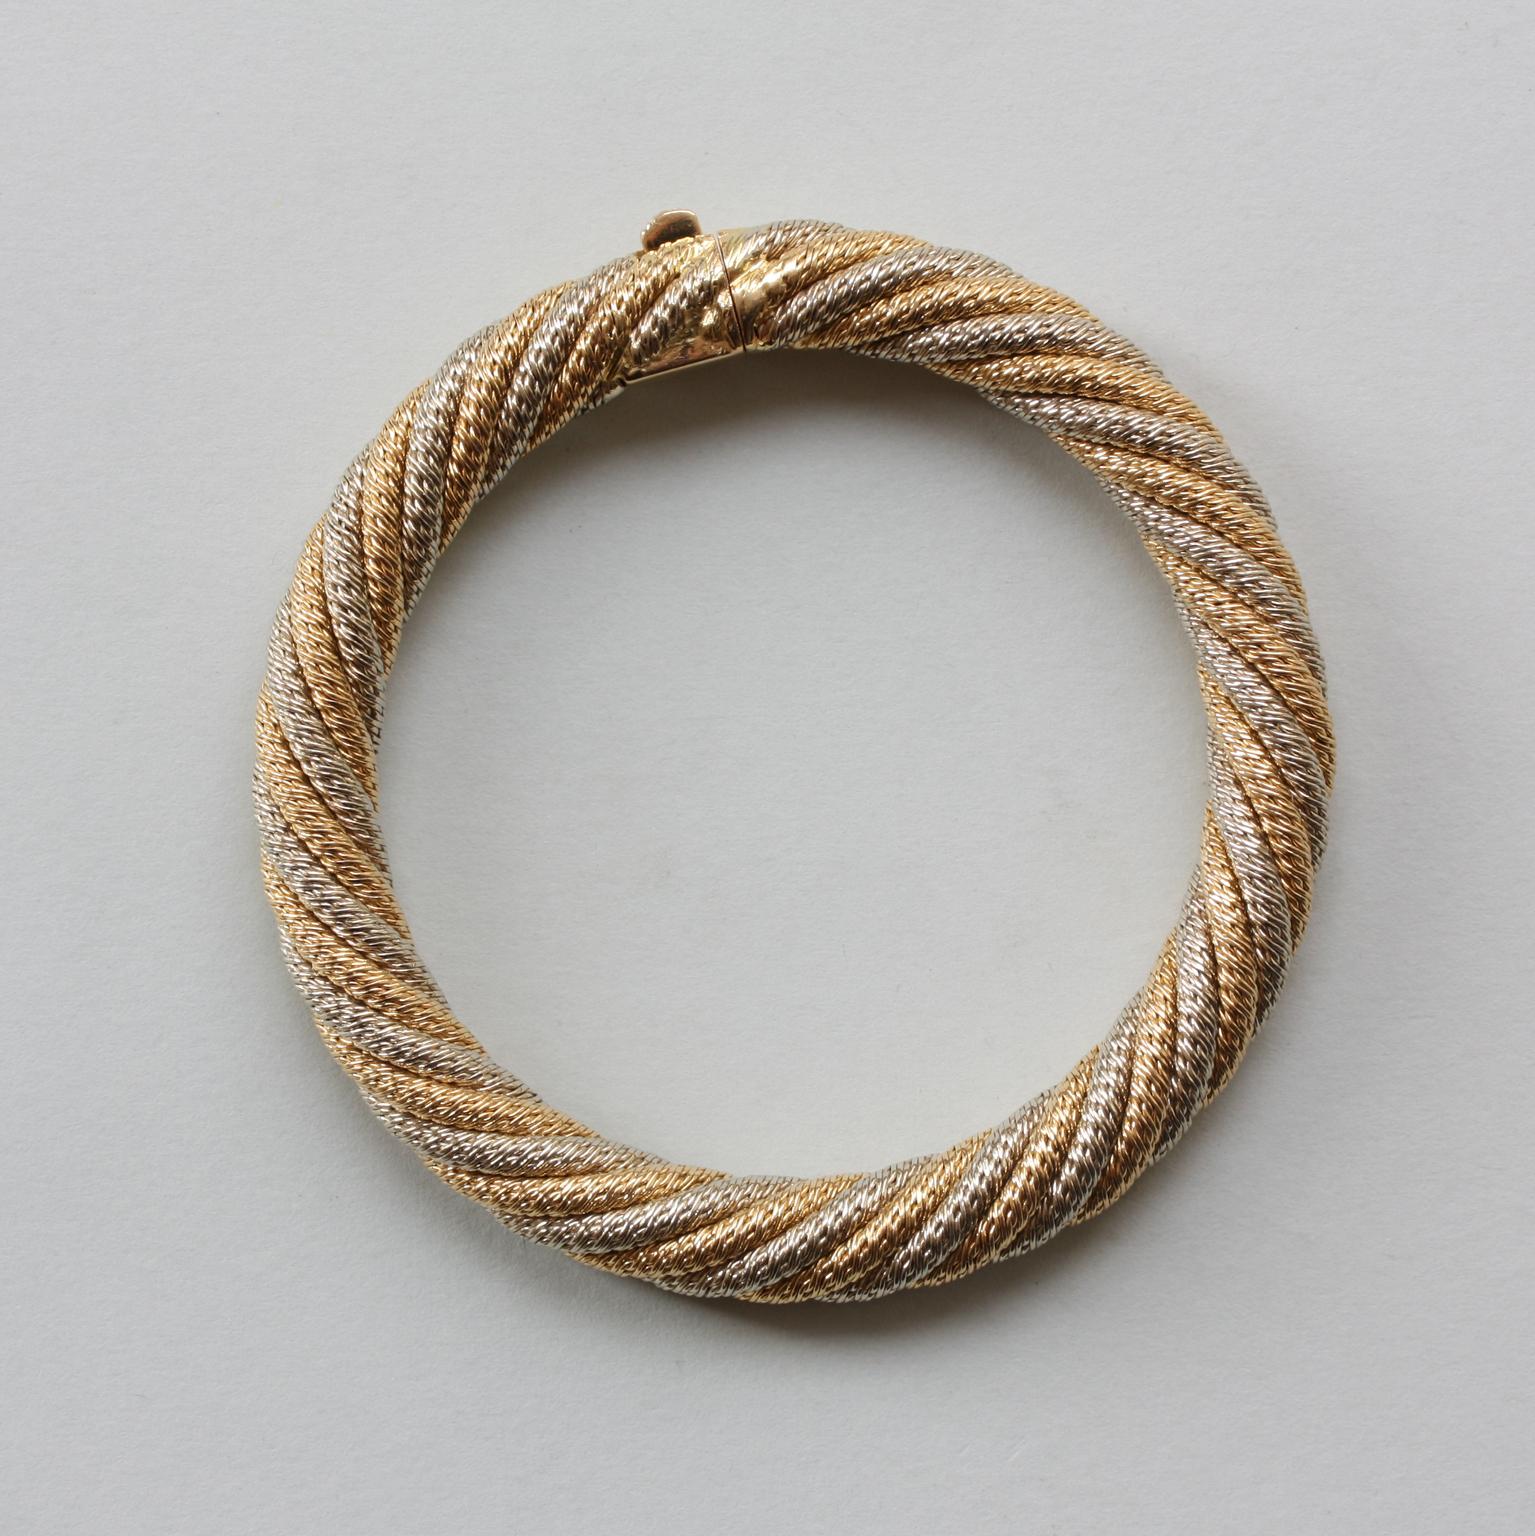 An 18-carat bi-colour gold woven bangle, with the two colours of gold intertwined. Cylindrical and flexible with a lock. Georges Lenfant, circa 1970.

weight: 61.42 grams
dimensions: 5.5 x 5.5
inner circumference: 17 – 17.5 cm
width: 9 mm